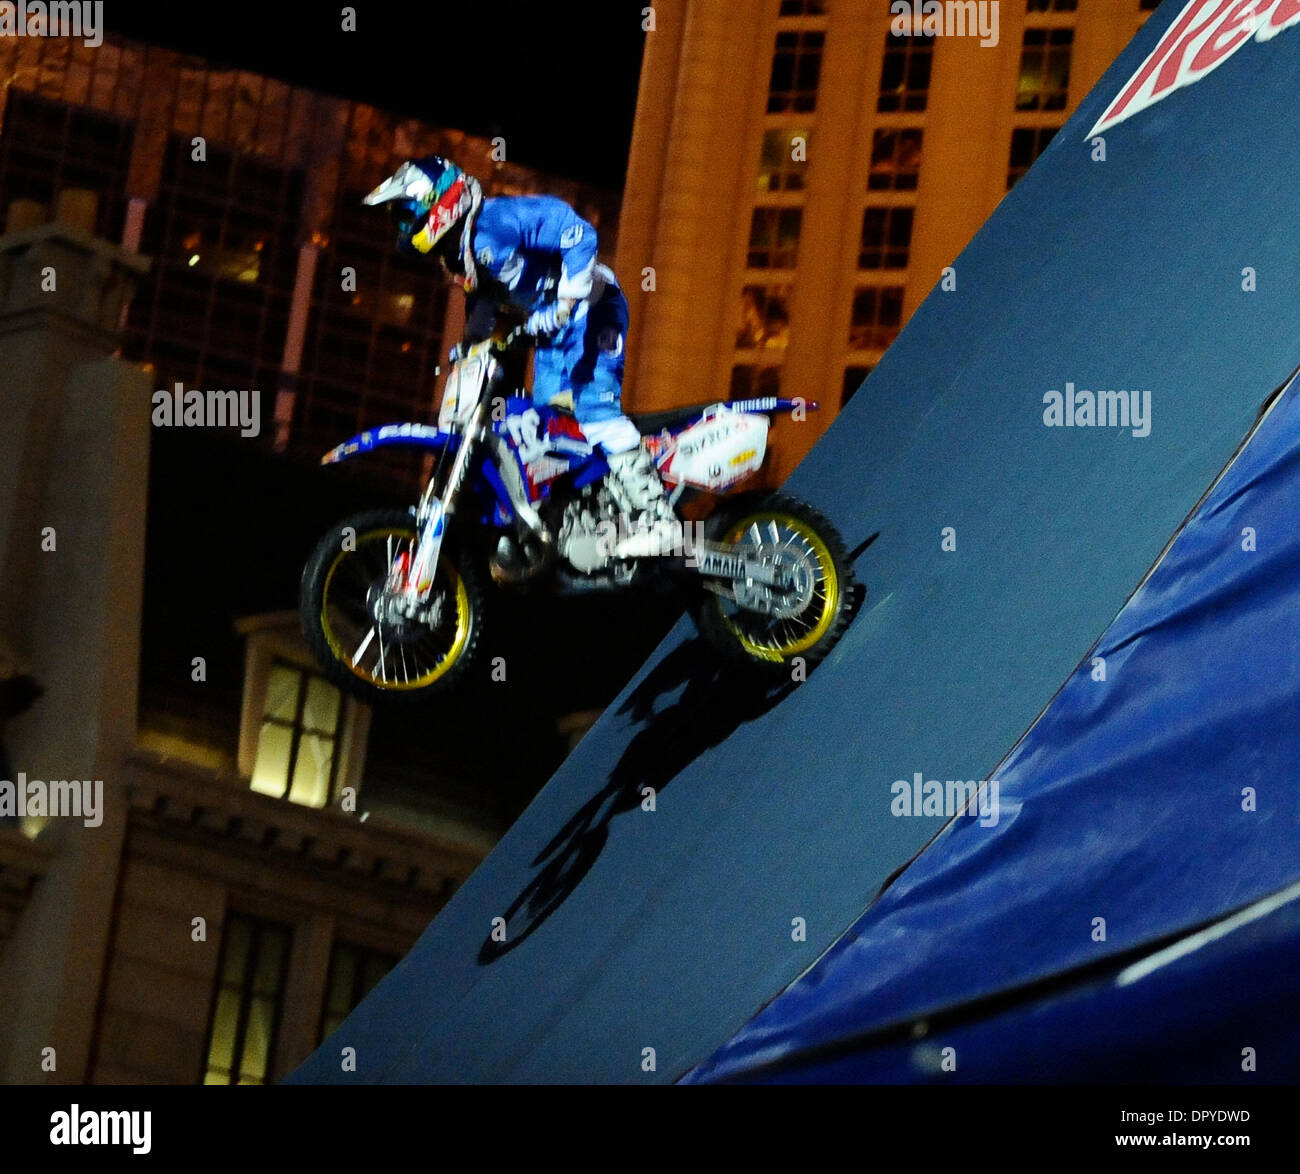 Dec 31, 2008 - Las Vegas, Nevada, USA - Motor cross dare devil ROBBIE  MADDISON successfully jumps the Arc de Triomph at the Paris Hotel, the jump  aired live on ESPN for